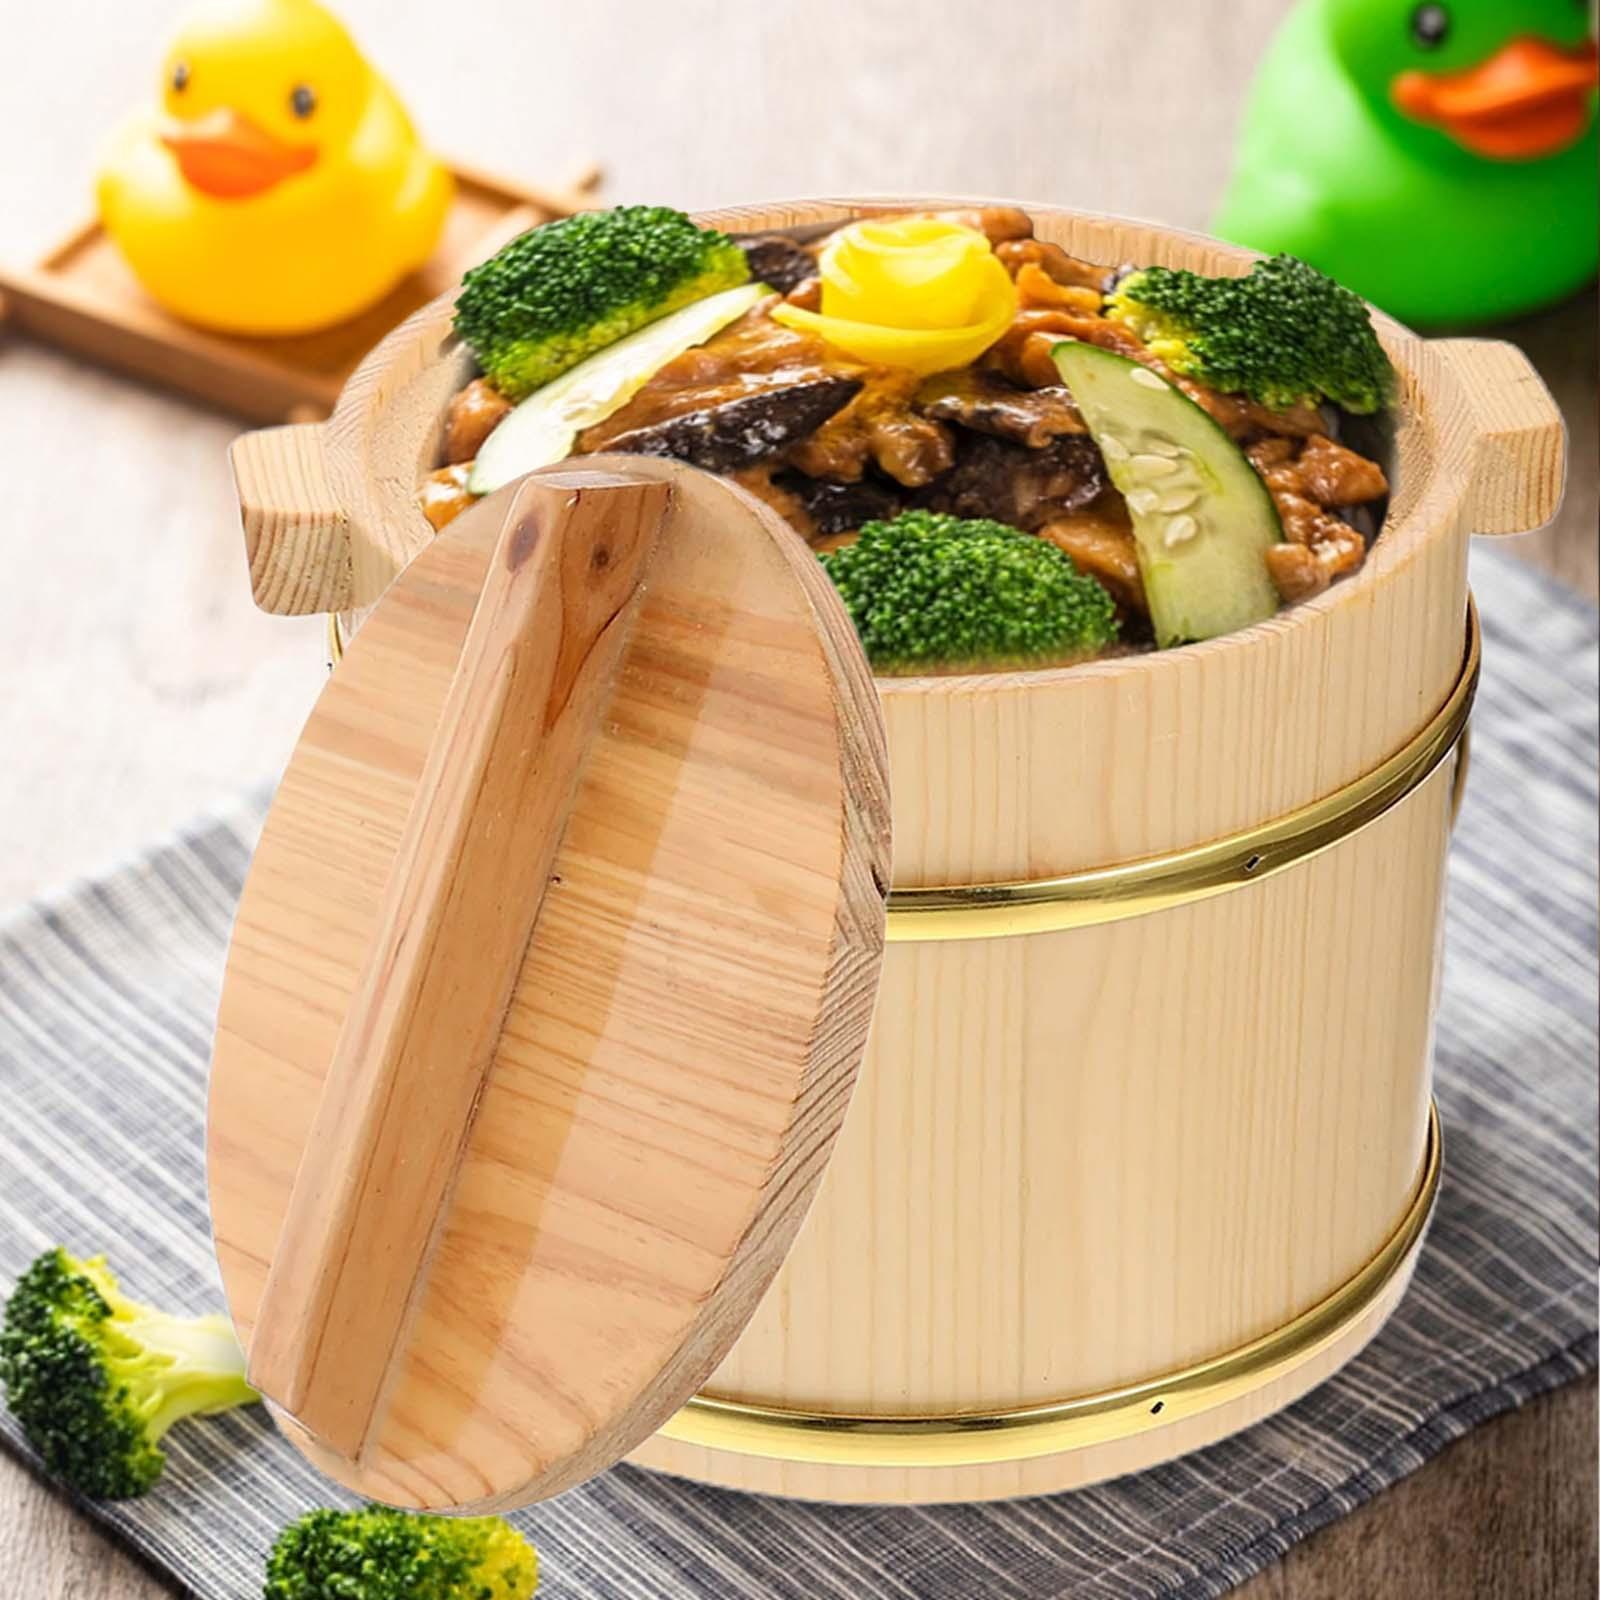 Japanese Rice Bucket, Wooden Sushi Rice Bowl, Reusable 16cm for Restaurant Kitchen Home